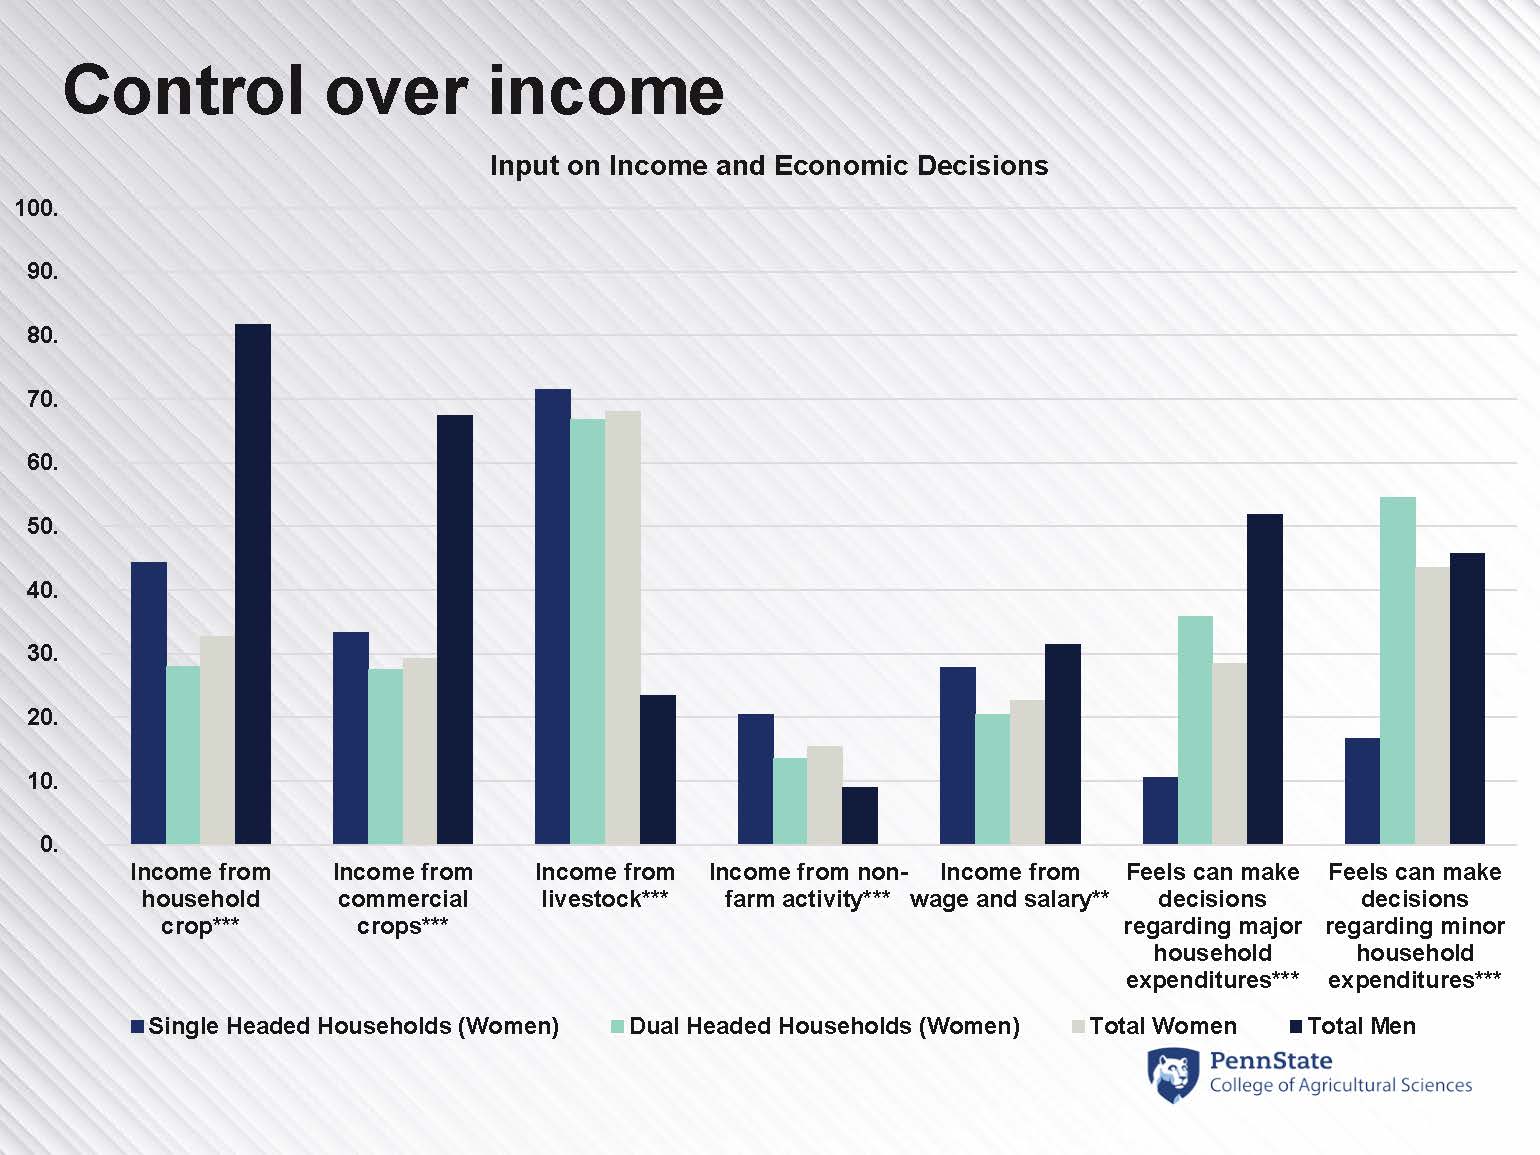 Graph showing responses to questions regarding control over different types of income, based on household role